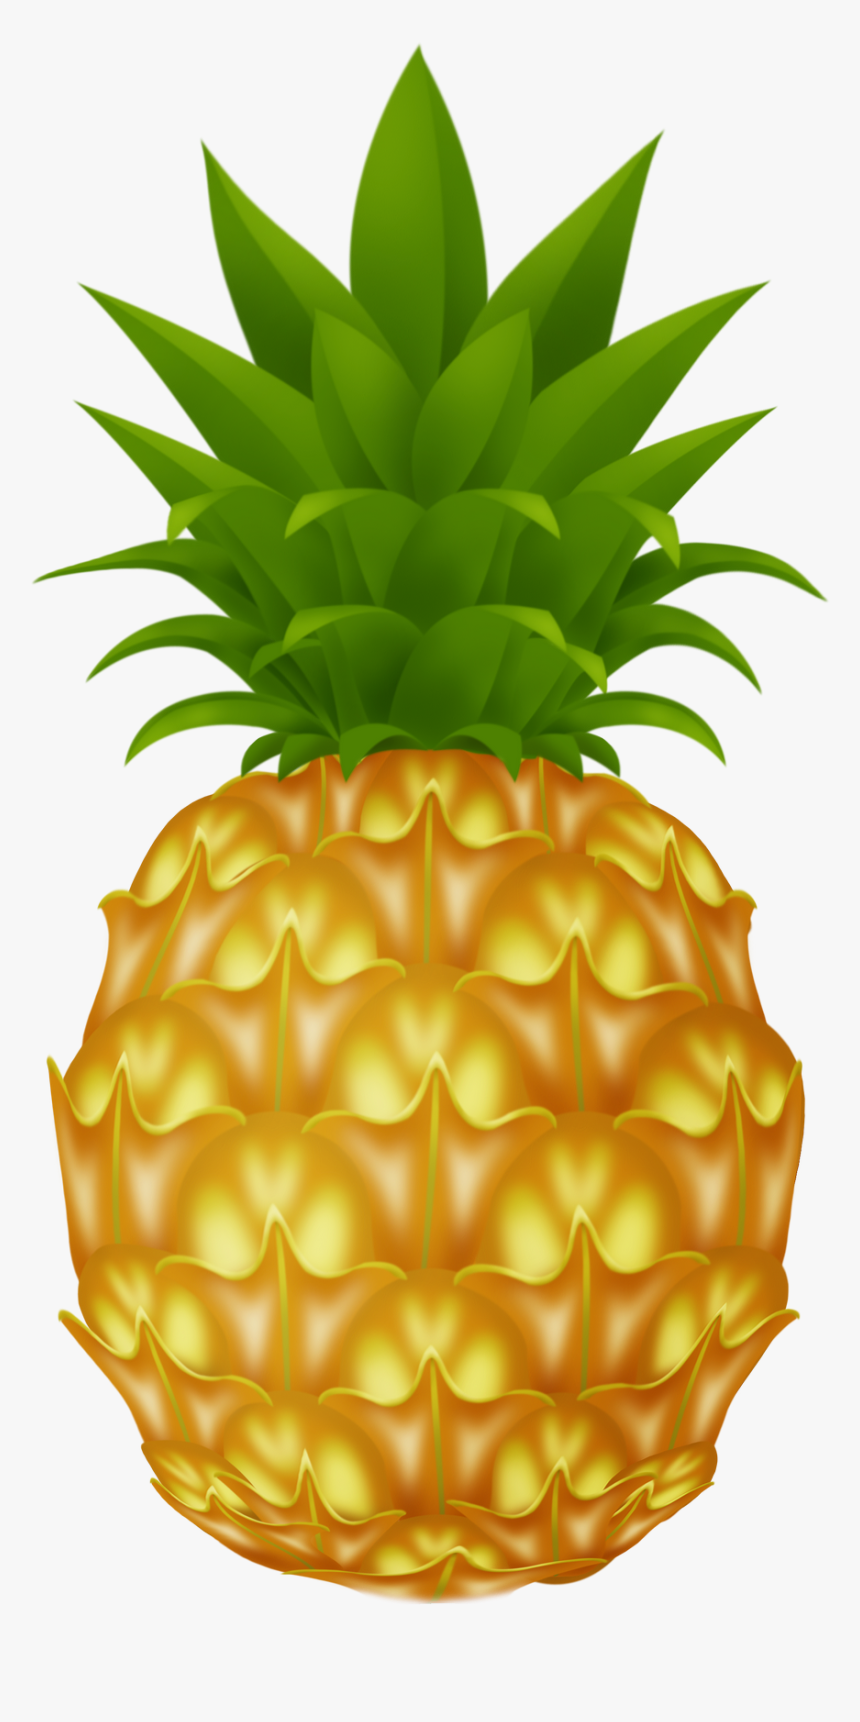 Pineapple Png Image - Pineapple Clipart Png, Transparent Png, Free Download